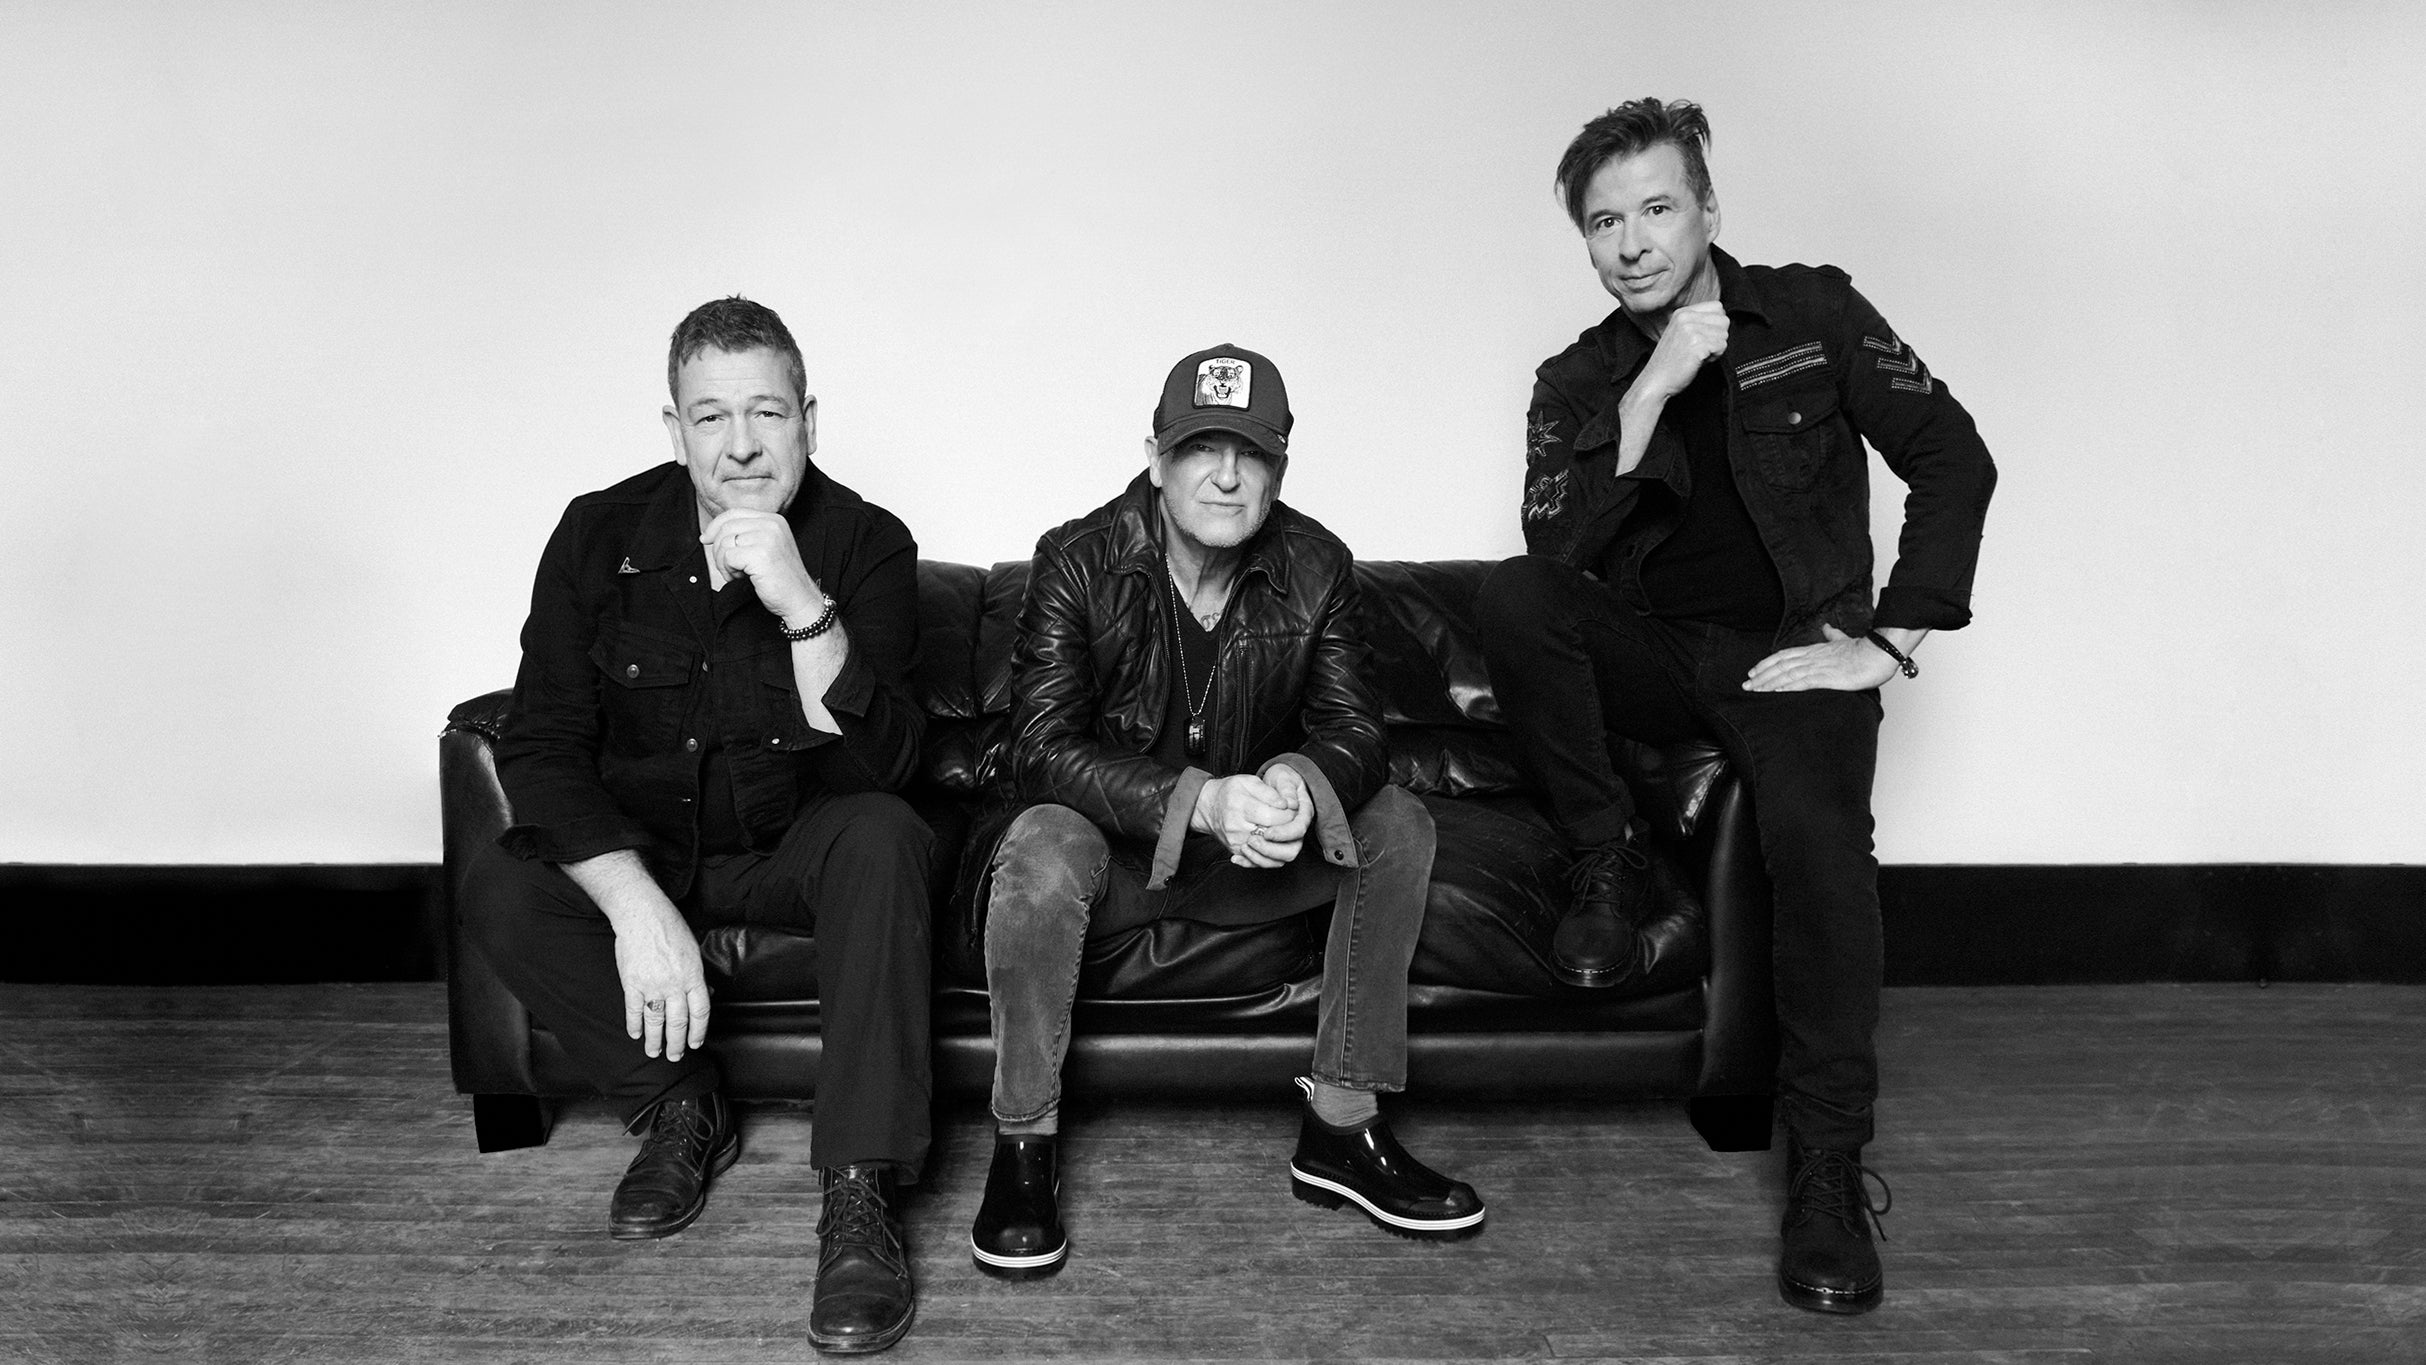 Glass Tiger with special guest The Kings in Rama promo photo for Ticketmaster CEN presale offer code